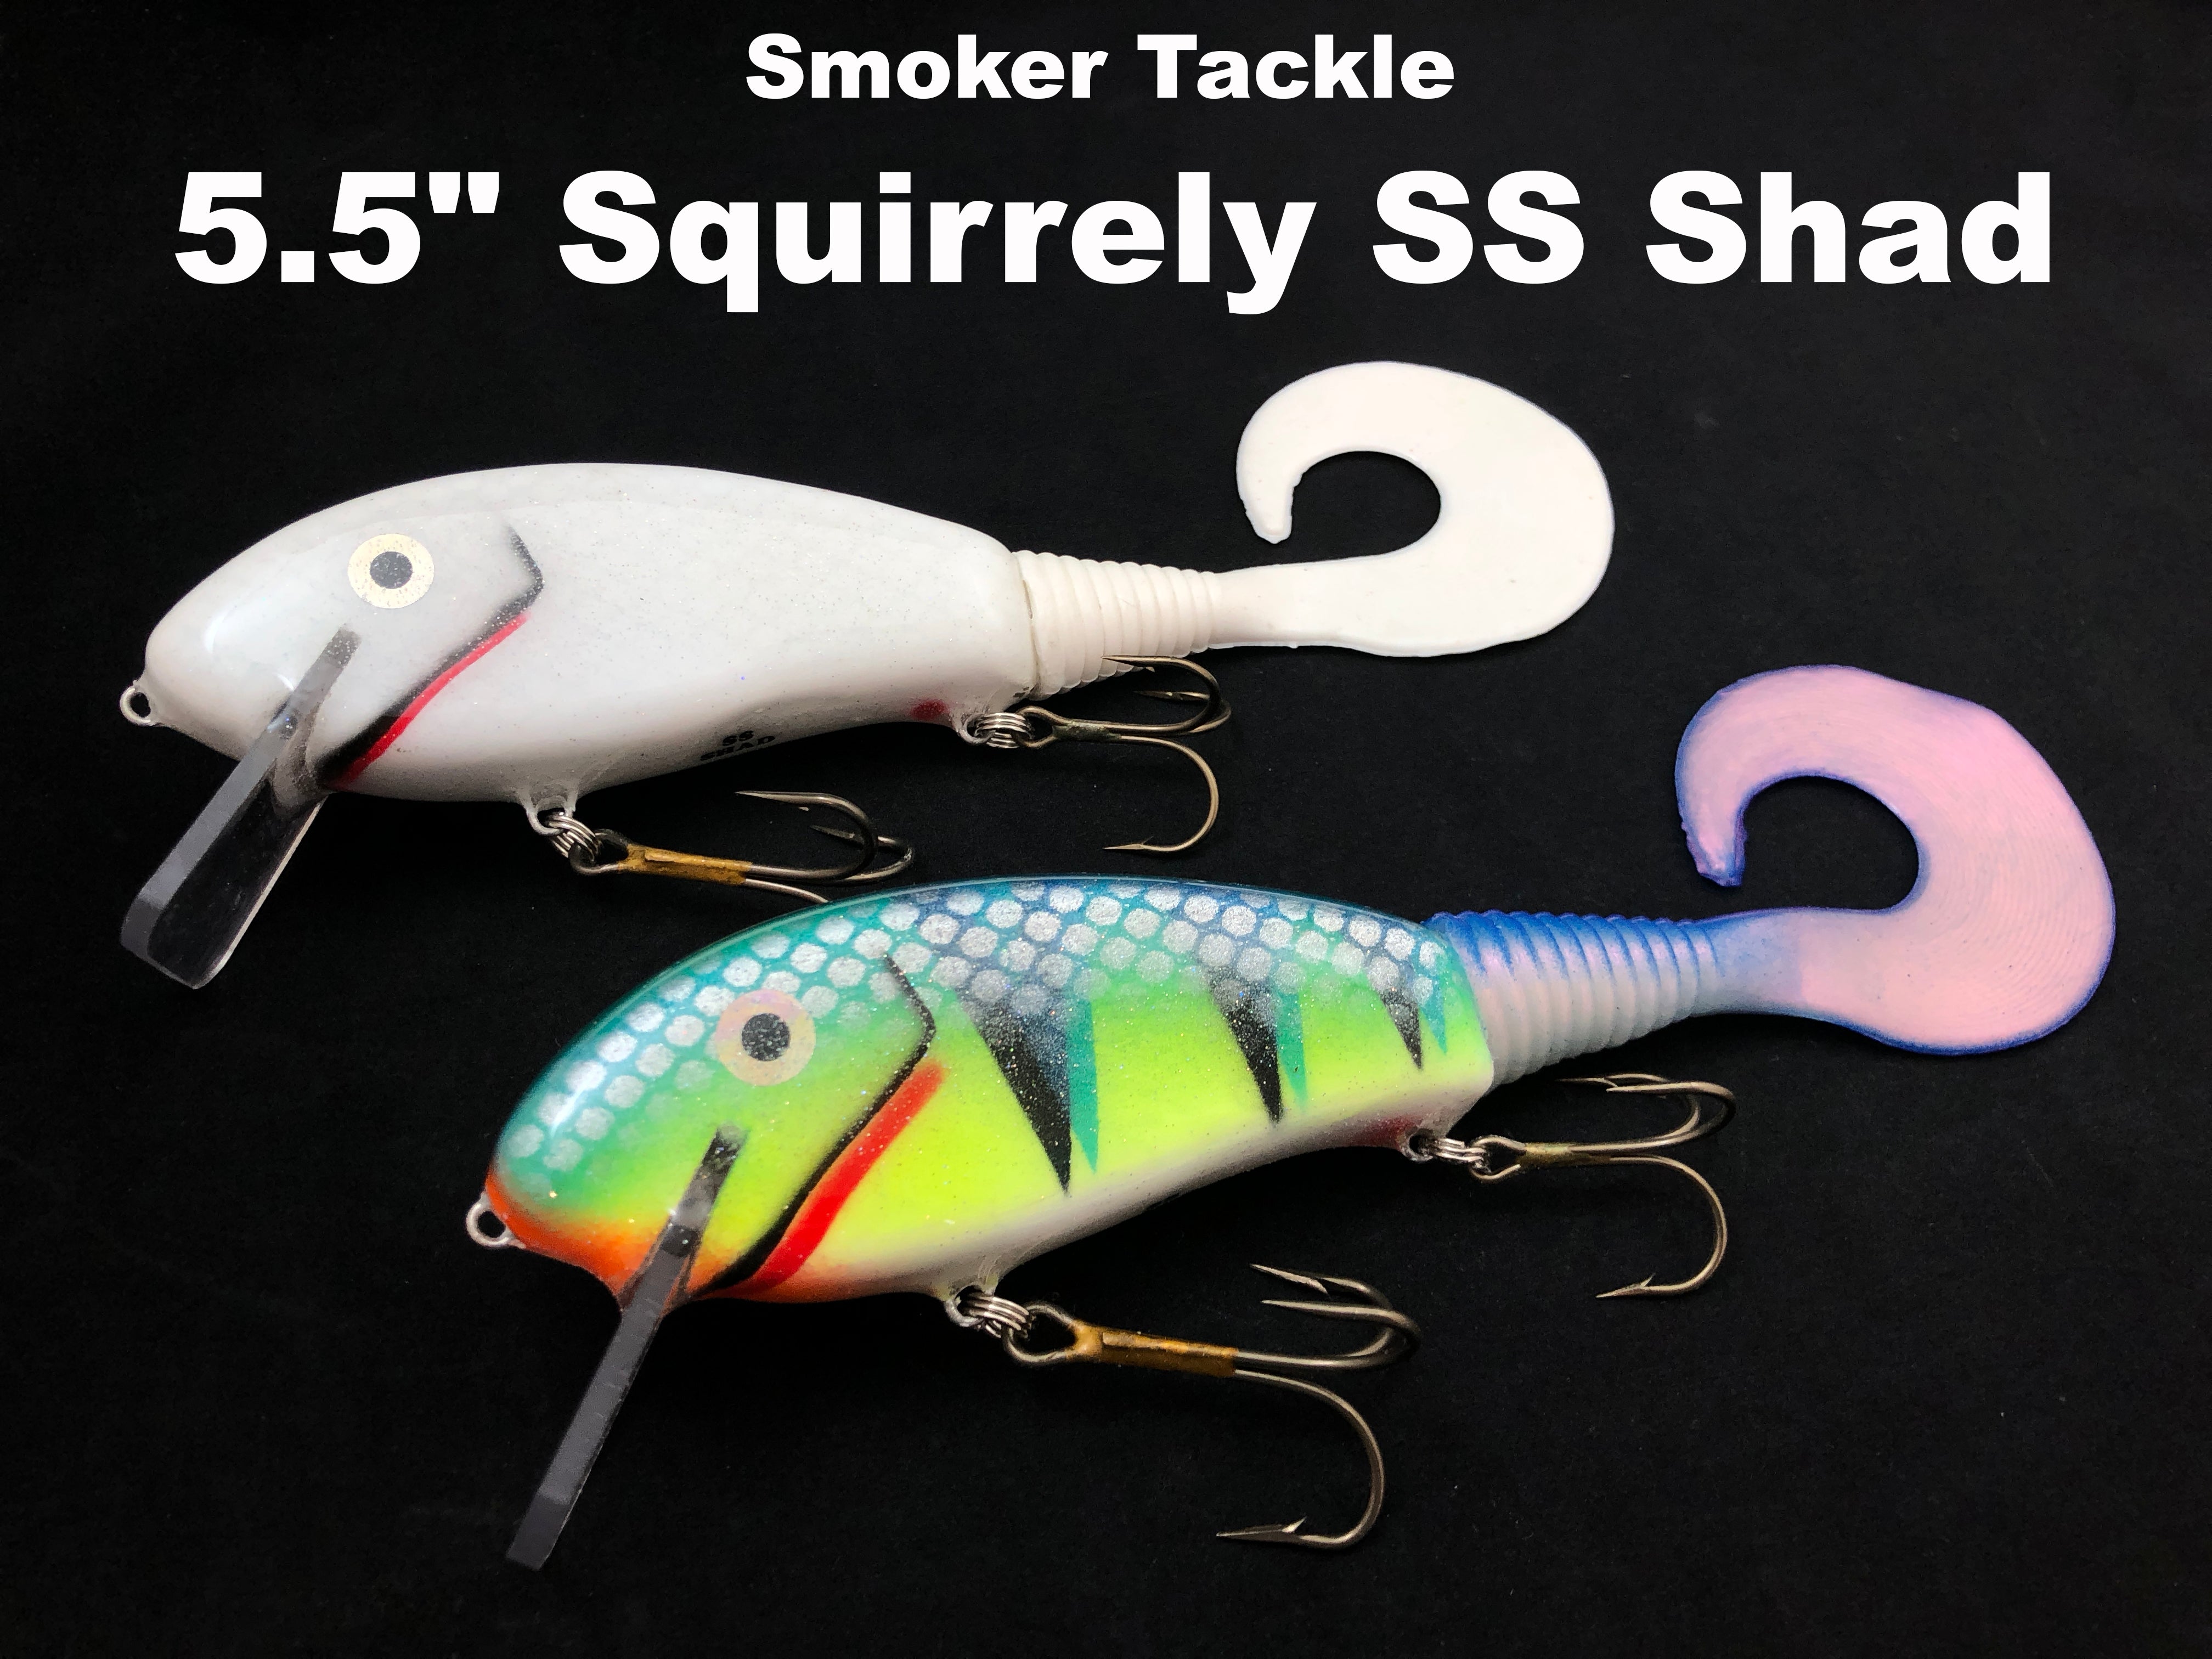 Smoker Tackle 5.5 Squirrely SS Shad